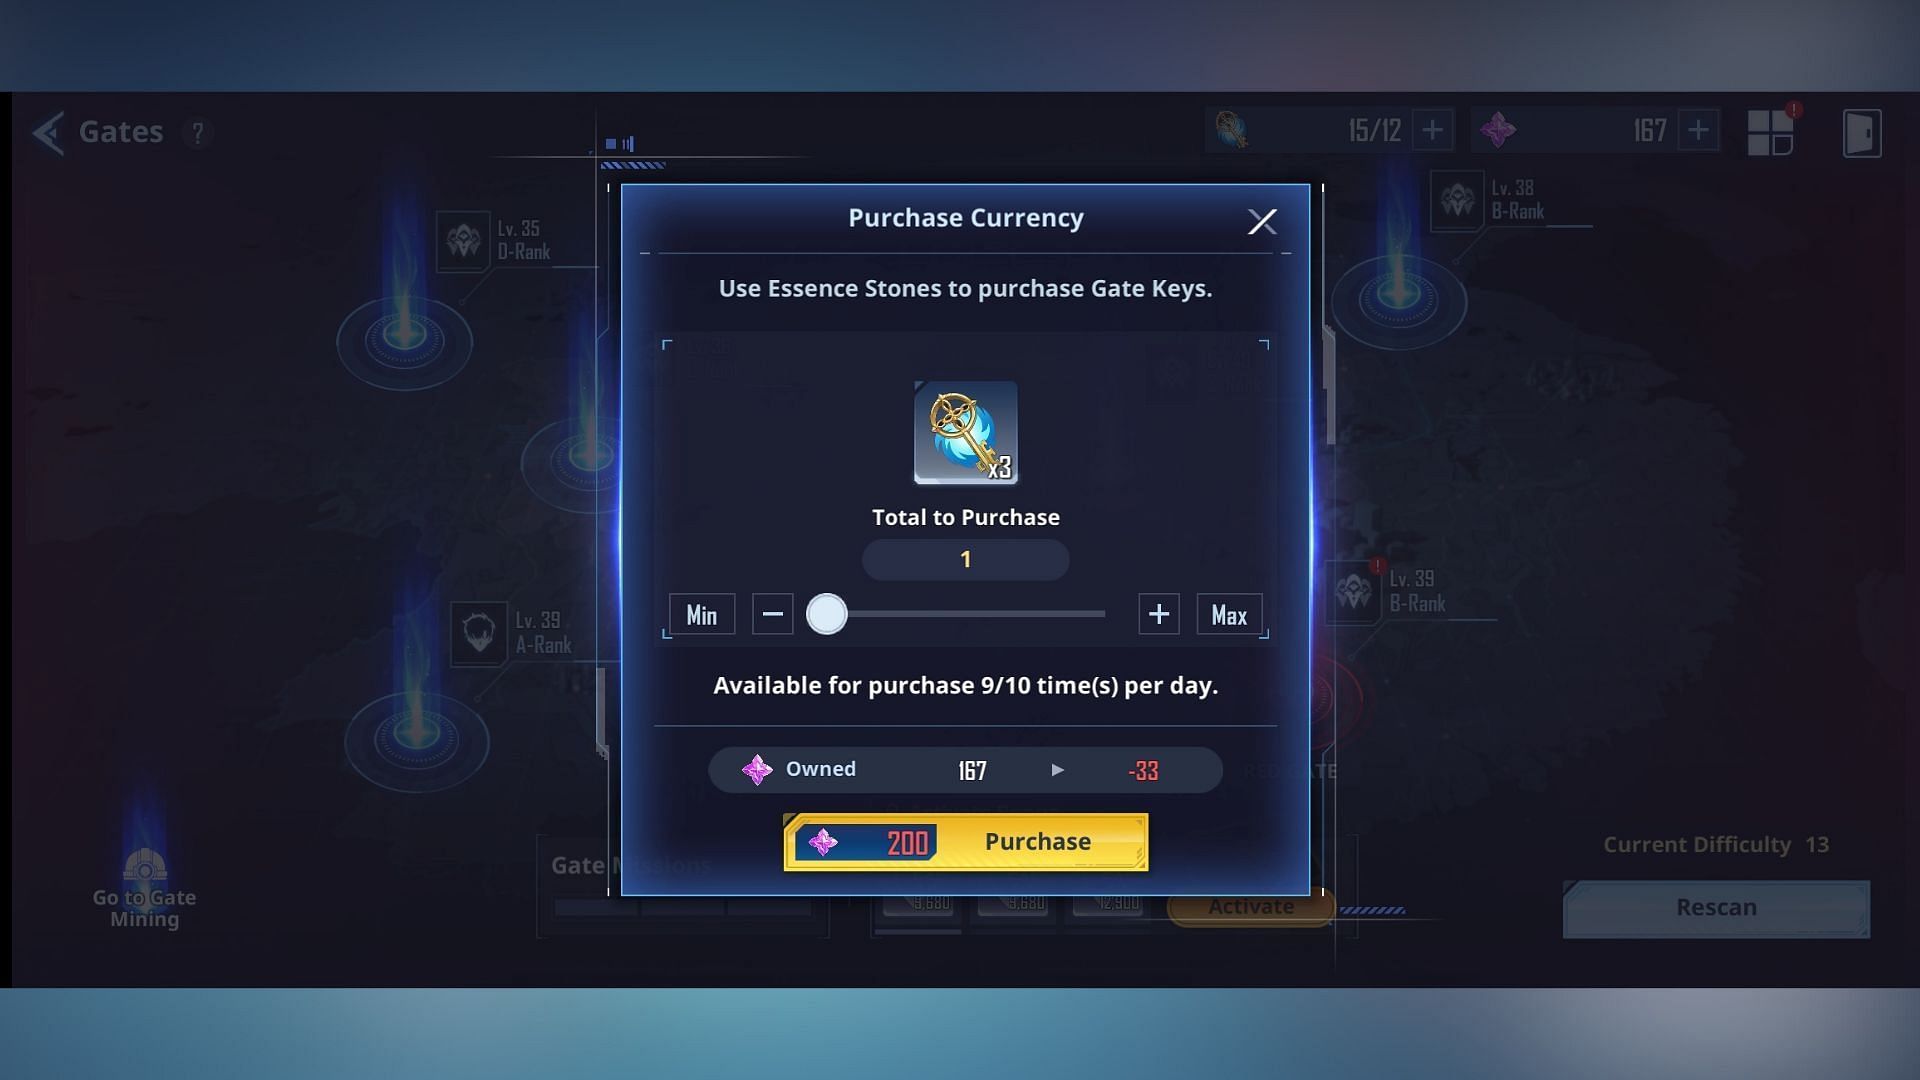 You can Exchange 150 Essence Stones for three gate keys up to 10 times daily (Image via Netmarble)